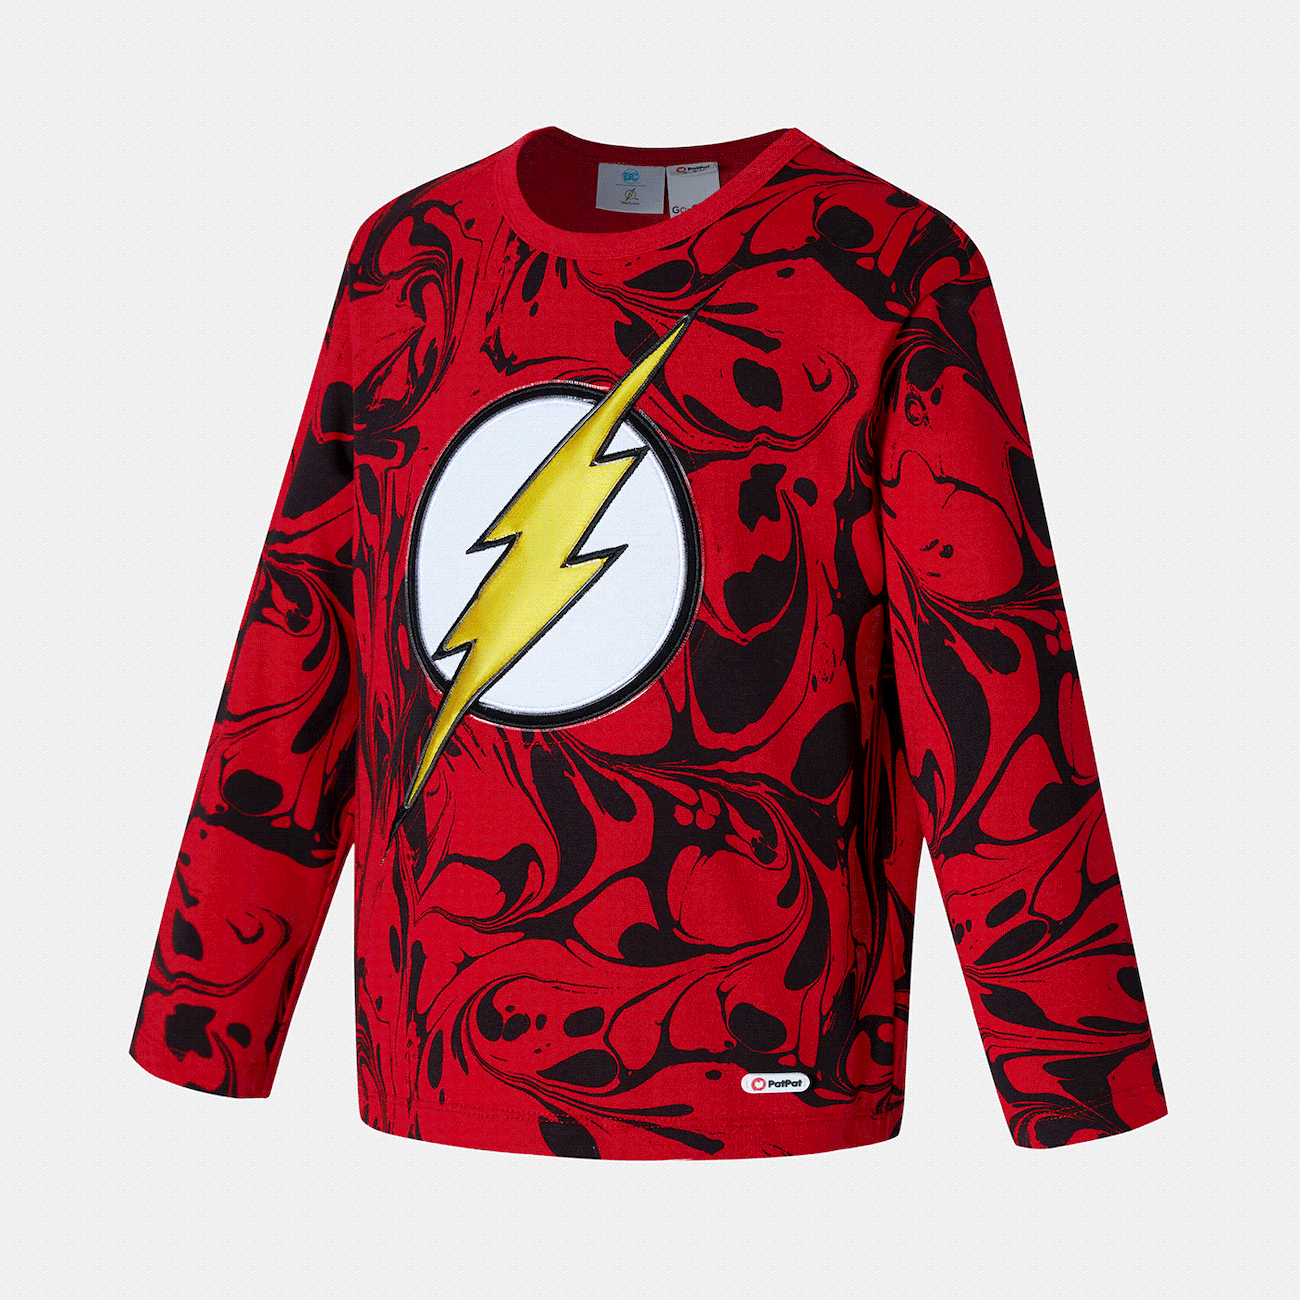 Go-Glow THE FLASH Illuminating Red Sweatshirt with Light Up The Flash Pattern Including Controller (Battery Inside) Red big image 1